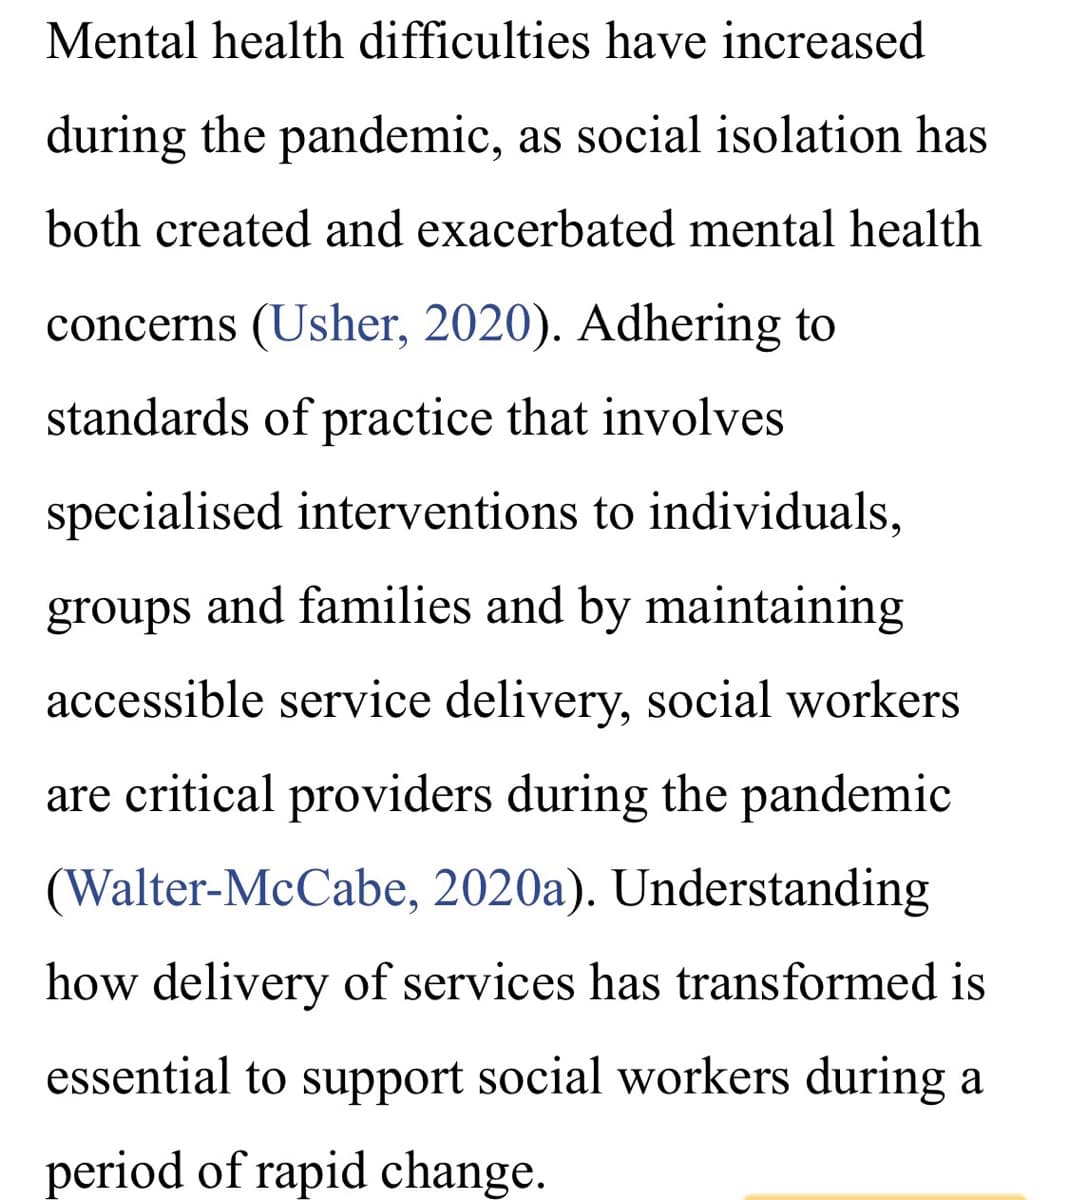 Mental health difficulties have increased
during the pandemic, as social isolation has
both created and exacerbated mental health
concerns (Usher, 2020). Adhering to
standards of practice that involves
specialised interventions to individuals,
groups and families and by maintaining
accessible service delivery, social workers
are critical providers during the pandemic
(Walter-McCabe, 2020a). Understanding
how delivery of services has transformed is
essential to support social workers during a
period of rapid change.